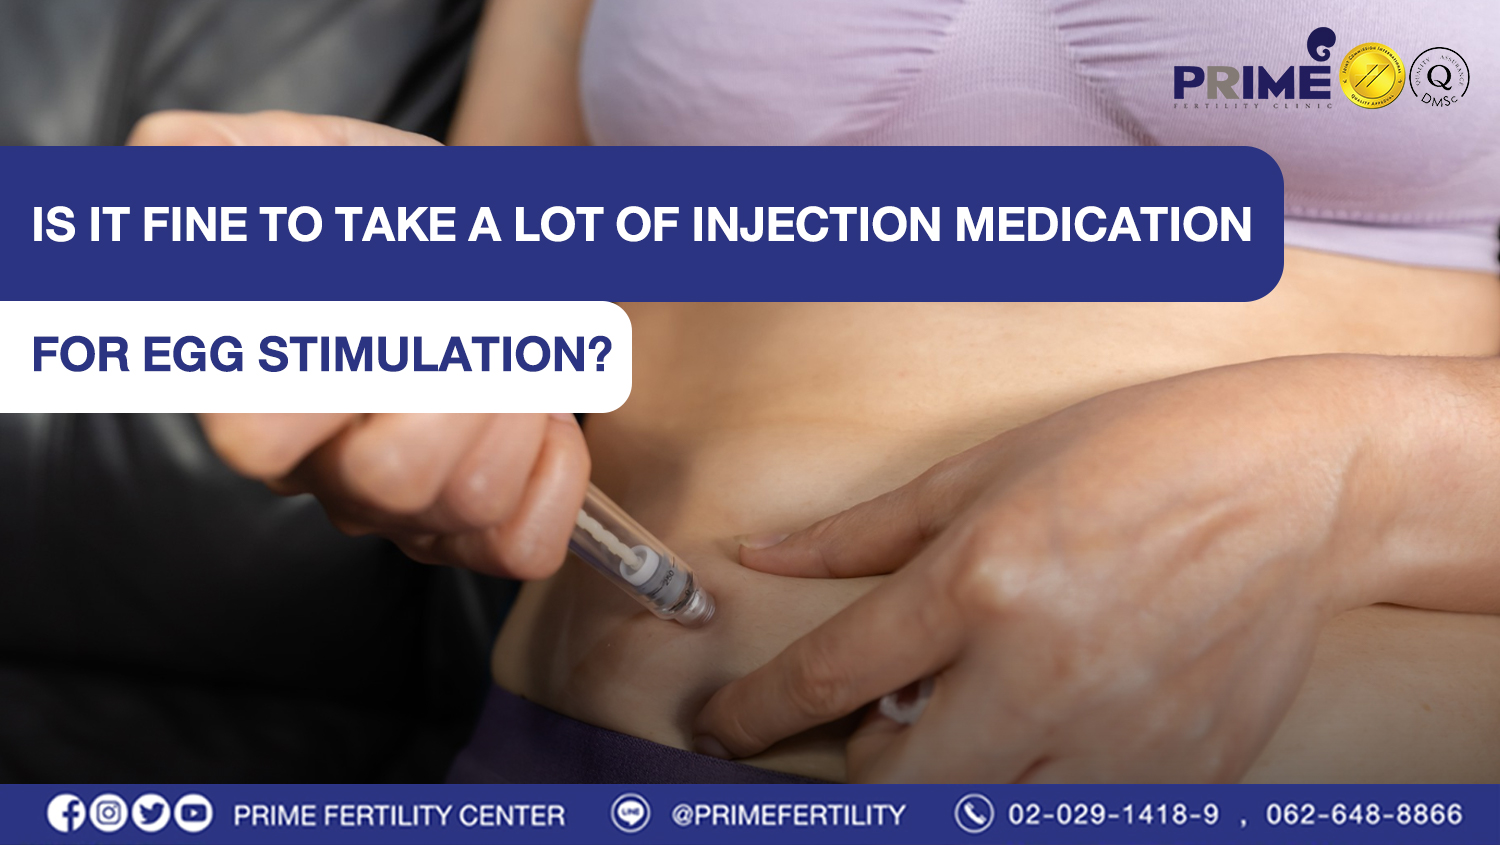 Is it fine to take a lot of injection medication for egg stimulation?